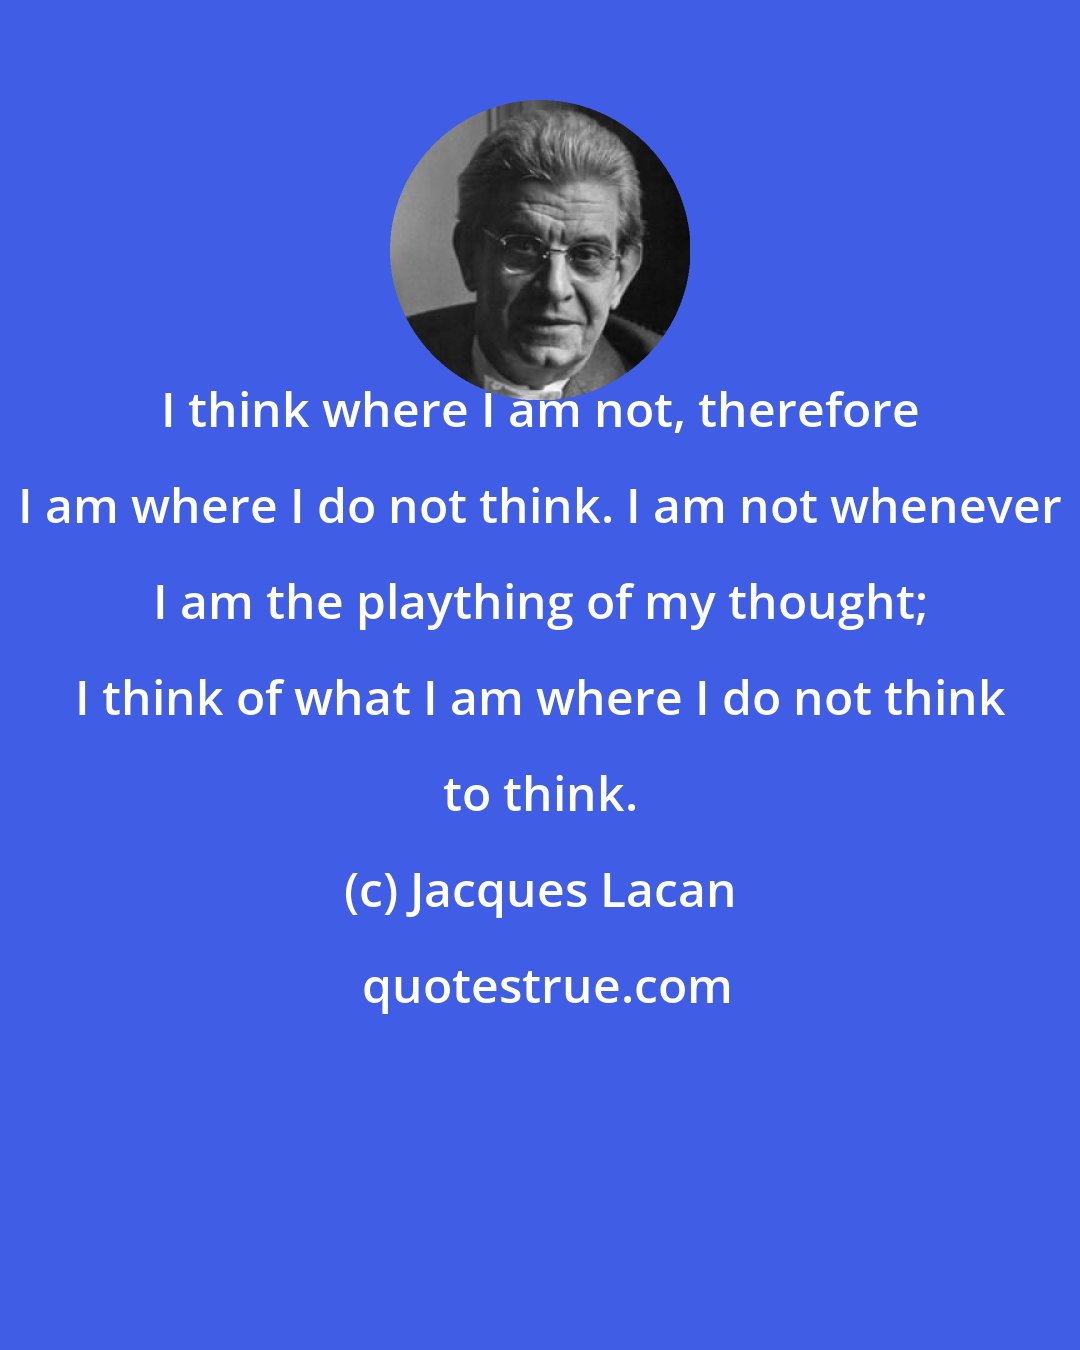 Jacques Lacan: I think where I am not, therefore I am where I do not think. I am not whenever I am the plaything of my thought; I think of what I am where I do not think to think.